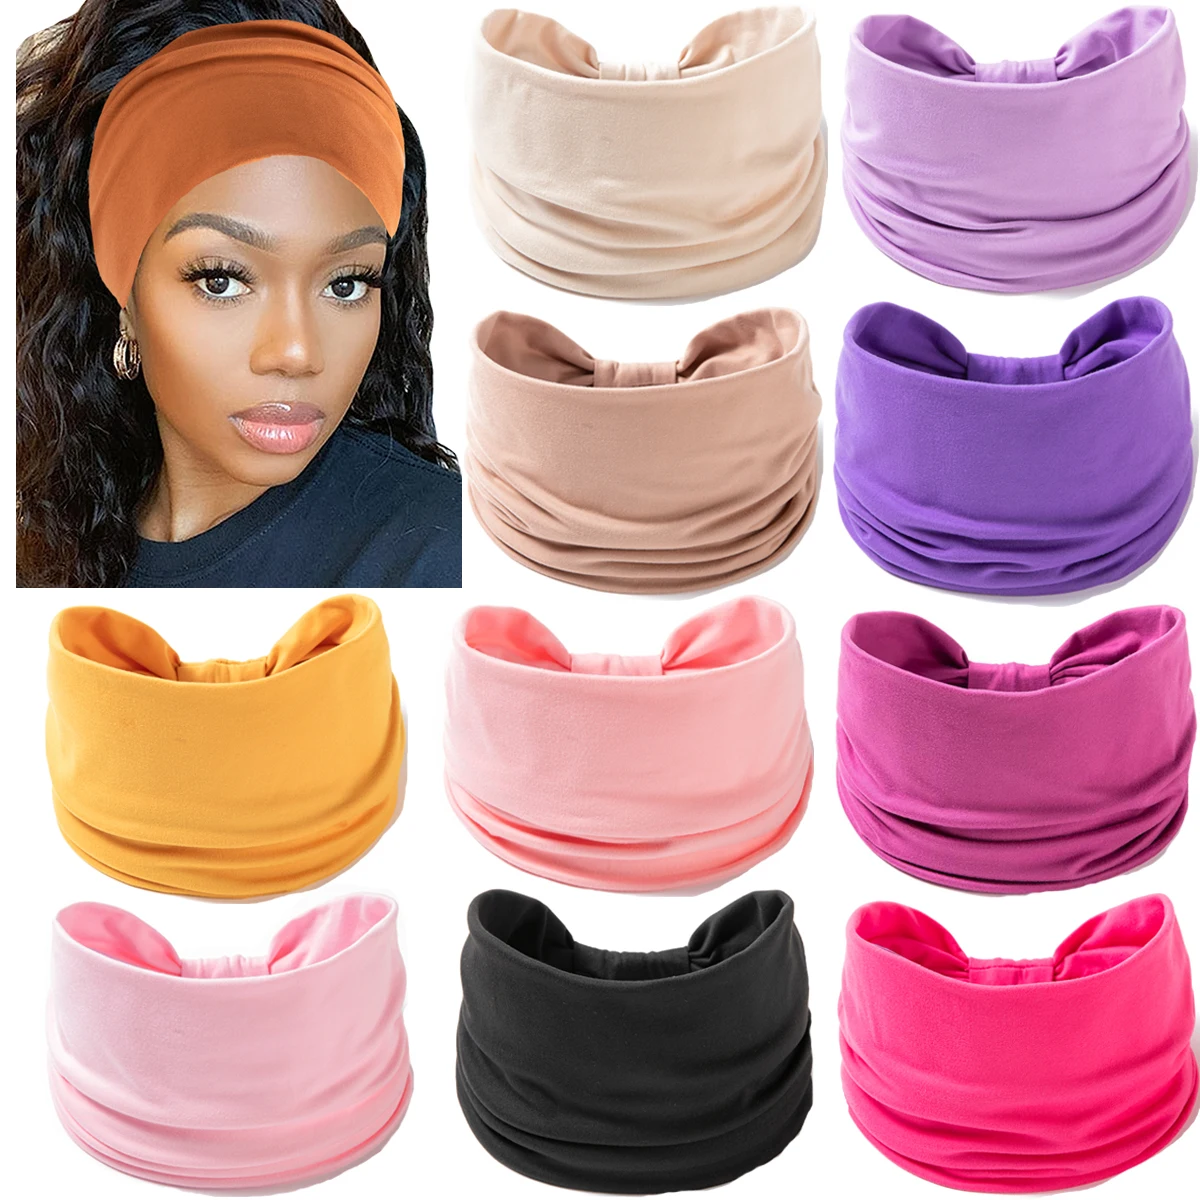 Wide Headband For Women Black Stylish Head Wraps Boho Thick Hairbands Large African Sport Yoga Turban Hair Band Hair Accessories